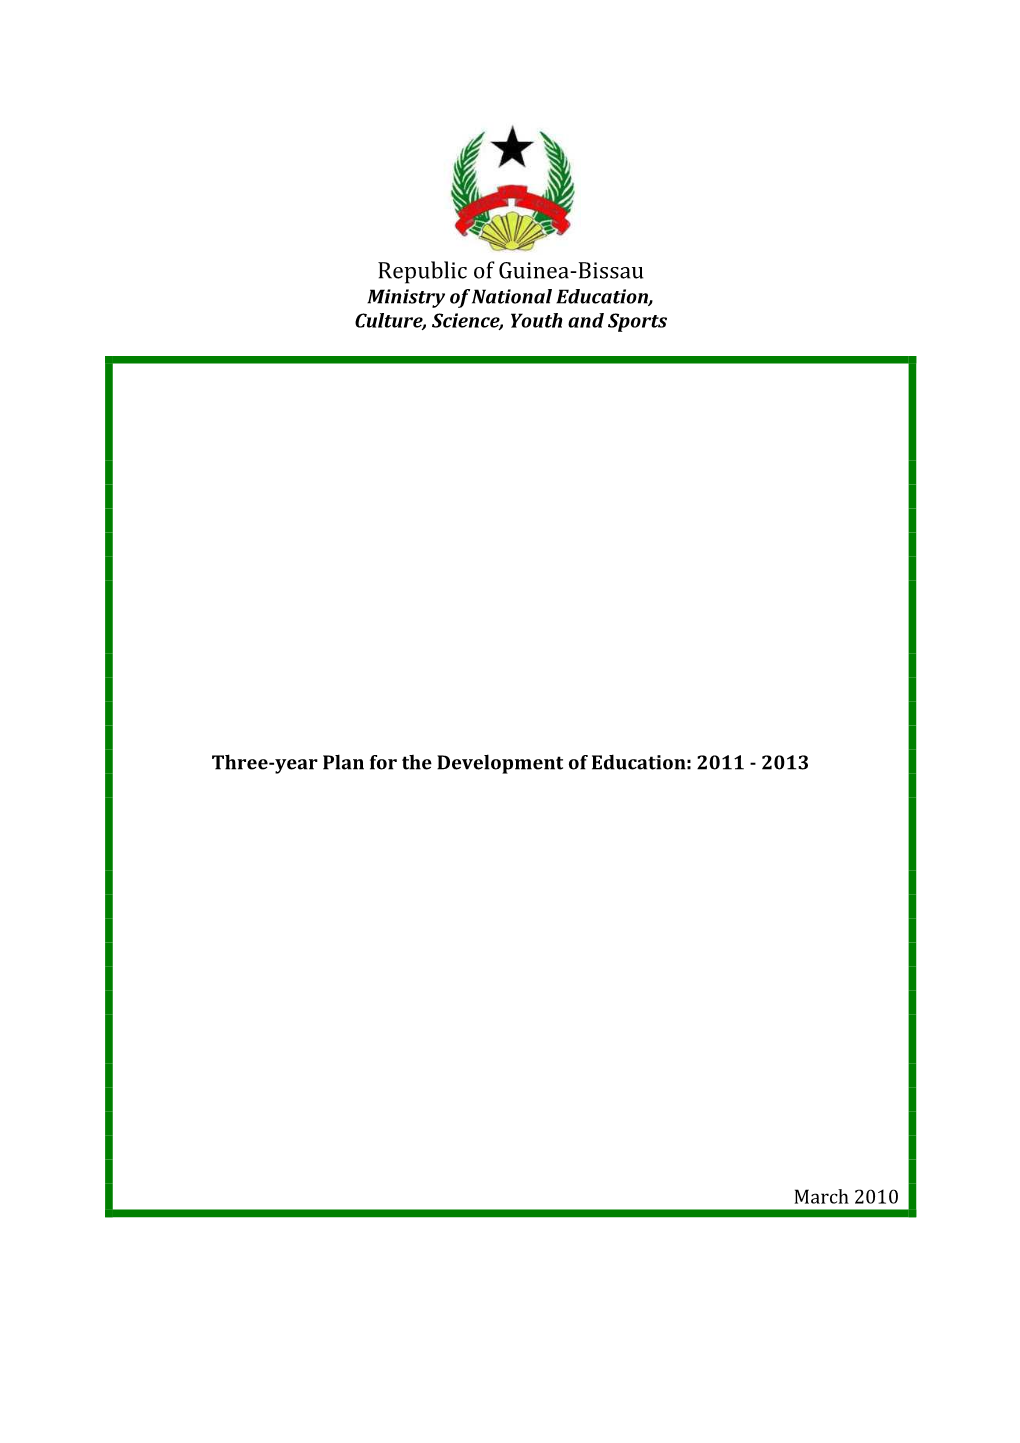 Republic of Guinea-Bissau Ministry of National Education, Culture, Science, Youth and Sports